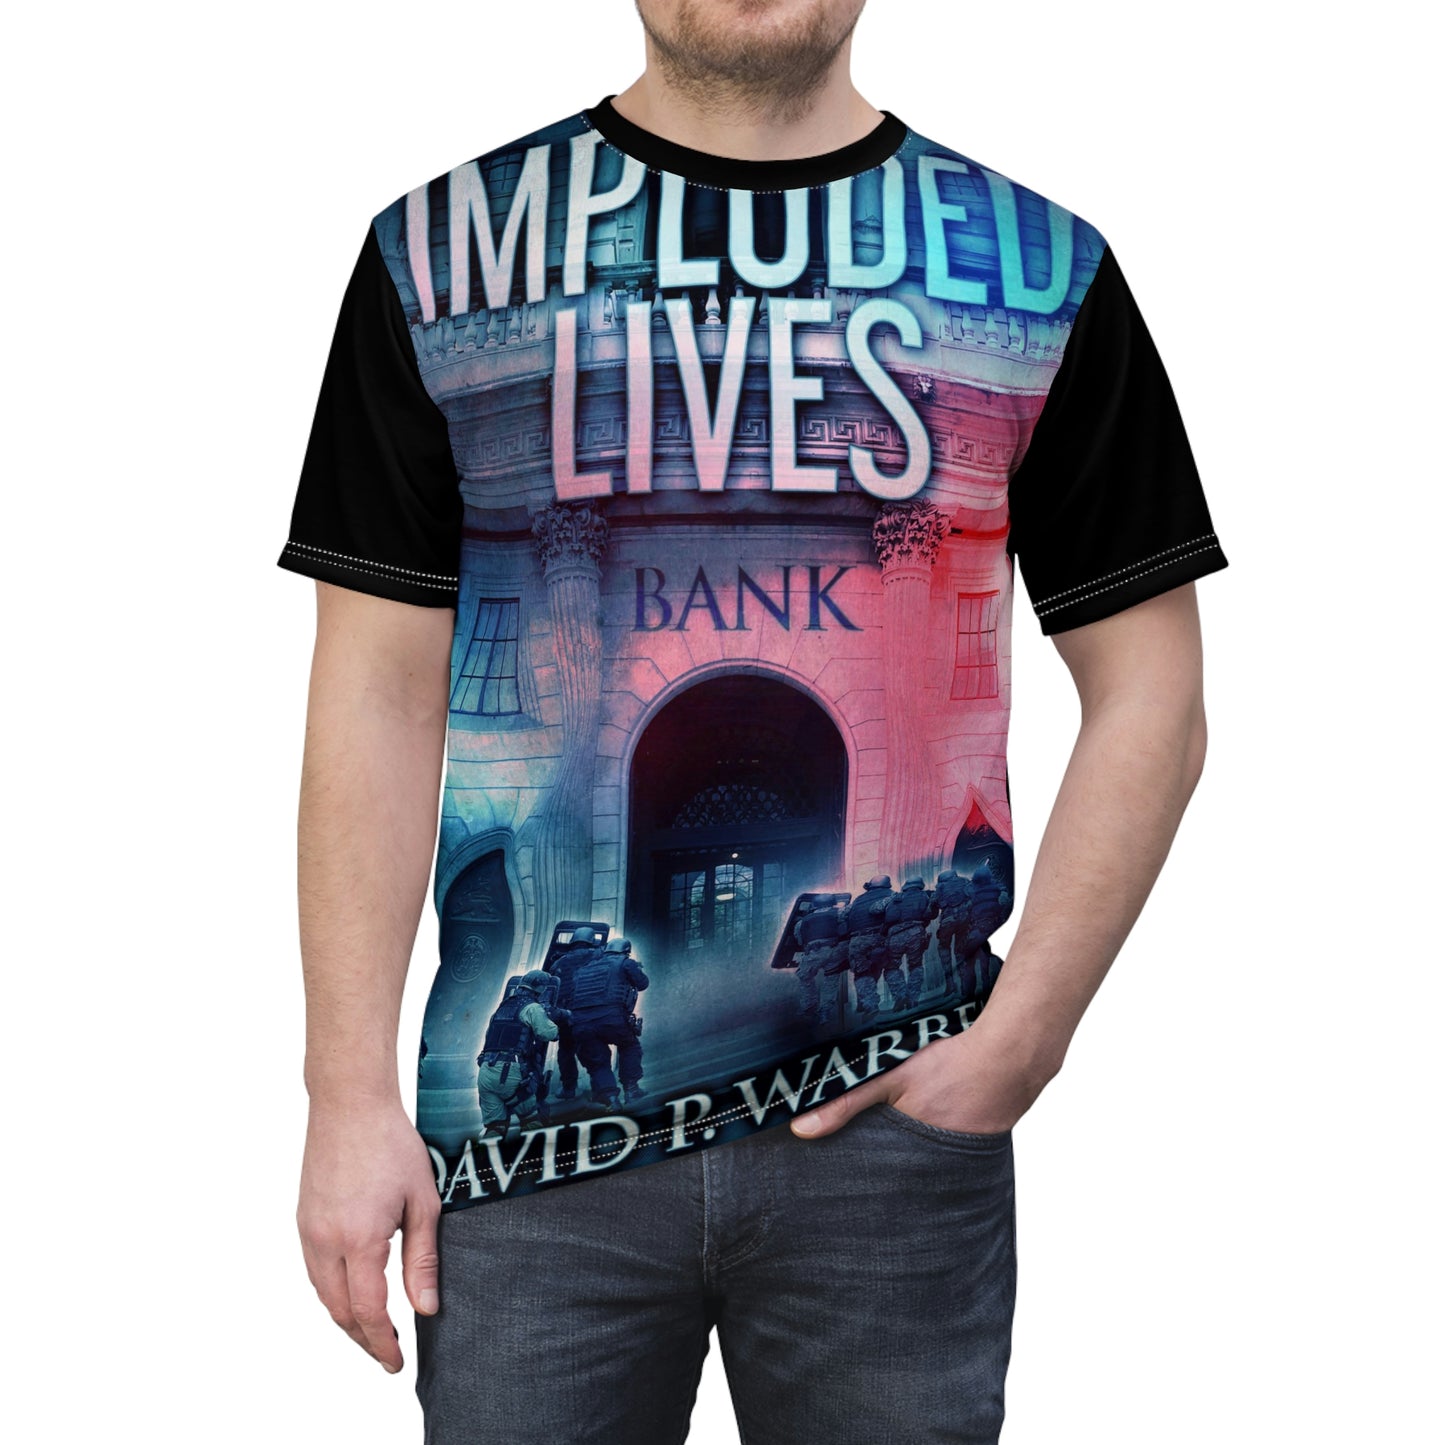 Imploded Lives - Unisex All-Over Print Cut & Sew T-Shirt